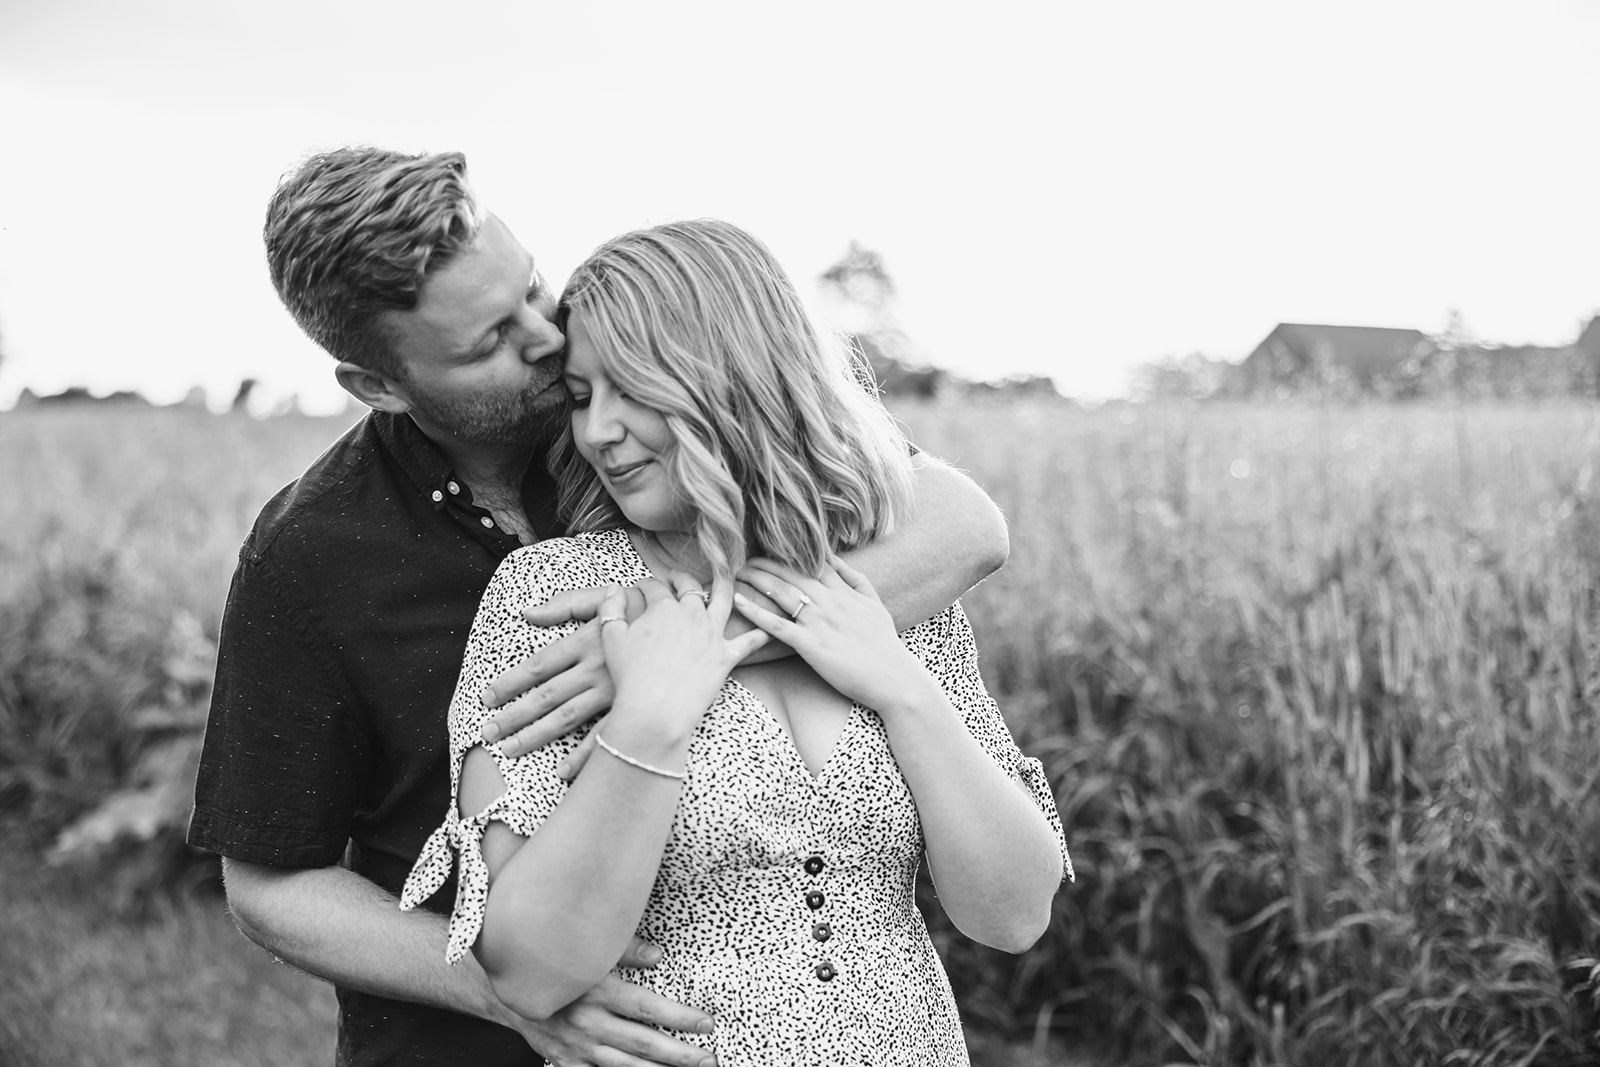 Candid and tender moments captured in the field during engagement shoot